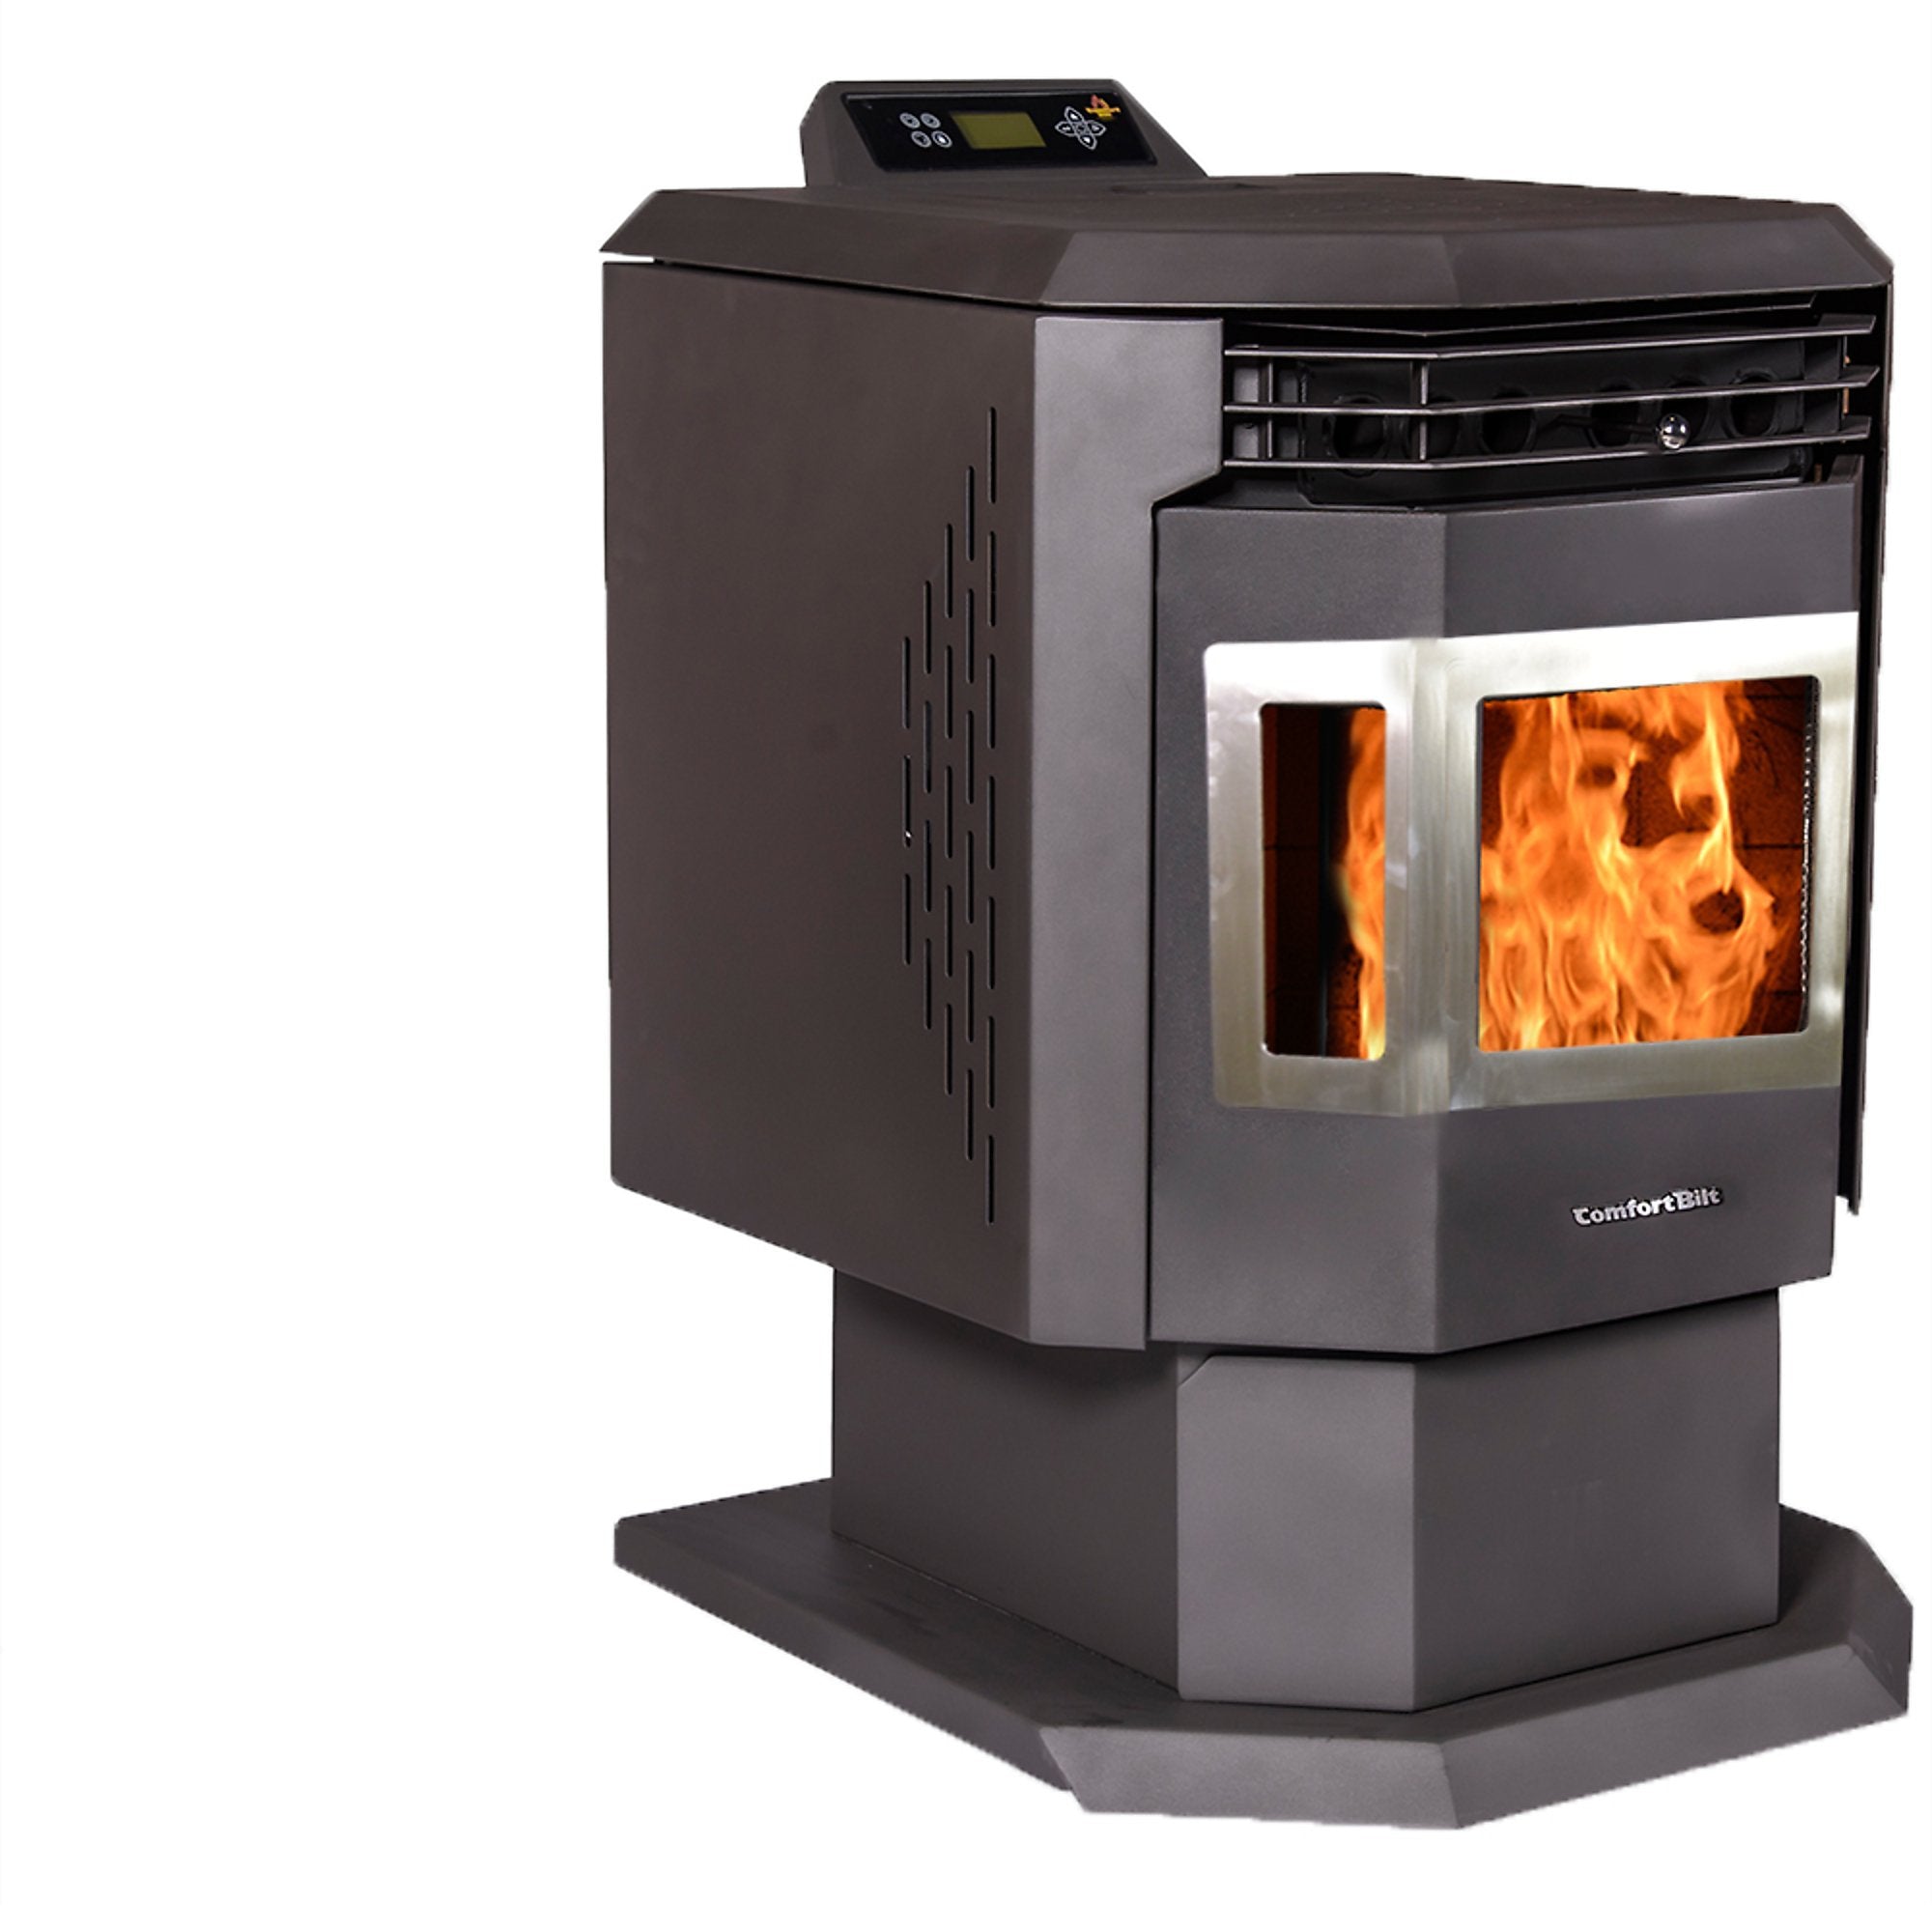 ComfortBilt HP21-SS 2,400 sq. ft. EPA Certified Pellet Stove with Auto Ignition Stainless Steel Trim New